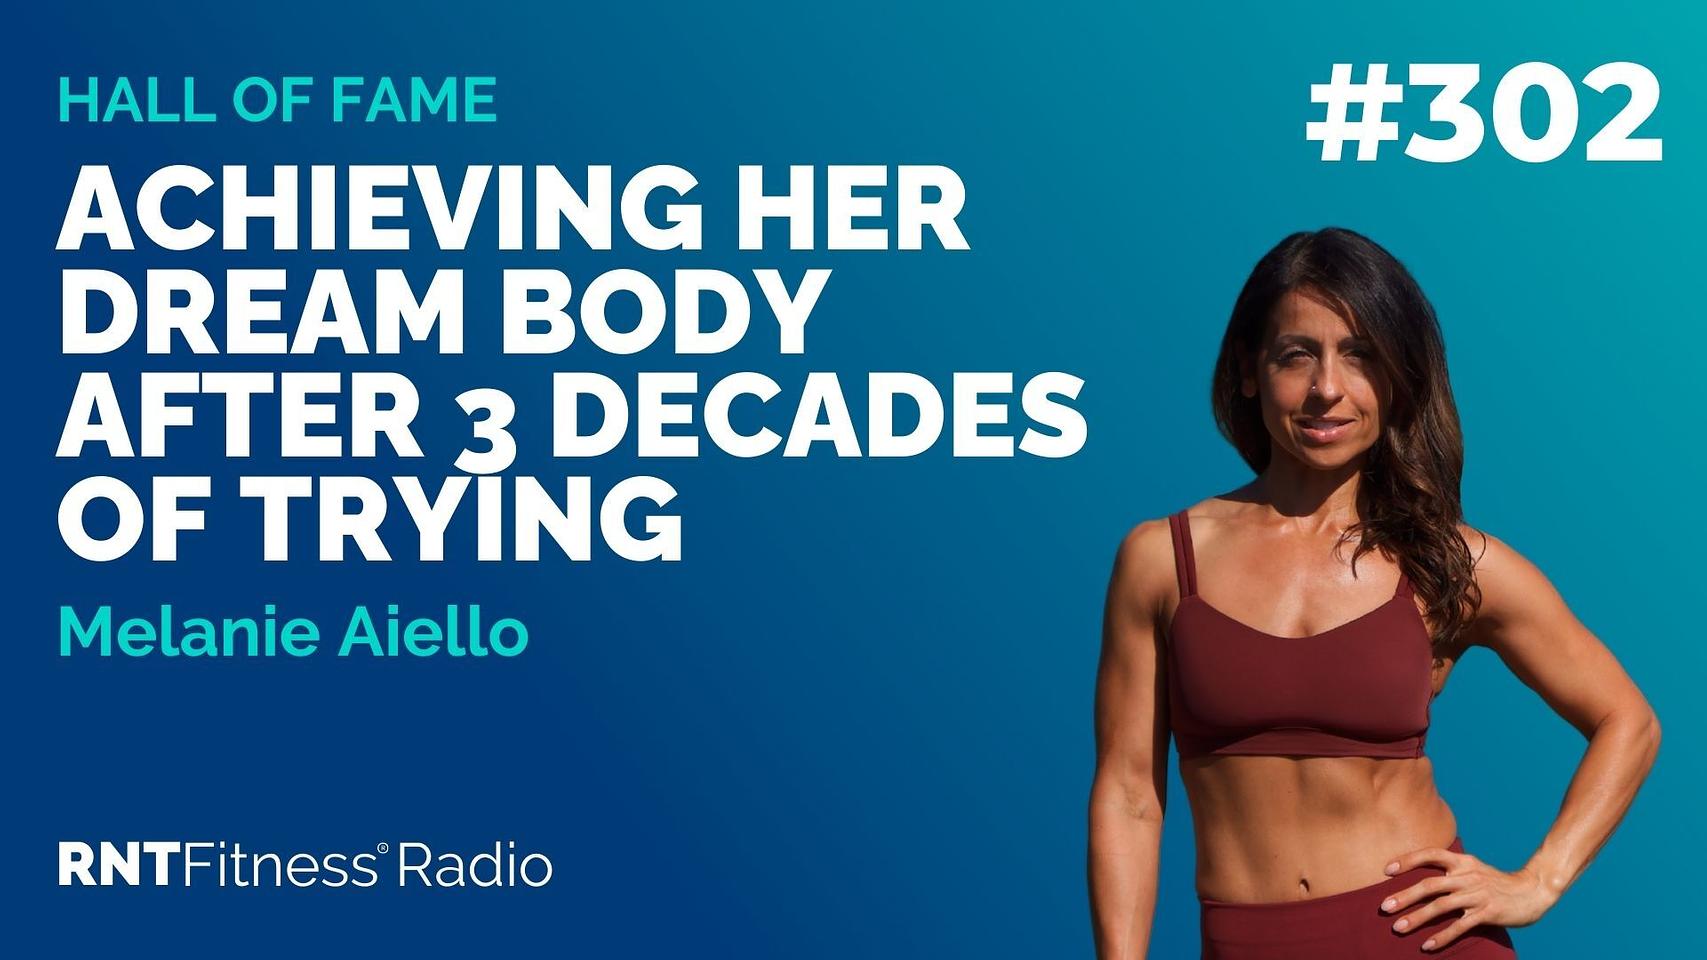 Ep 302 - Hall Of Fame | Melanie Aiello: Achieving Her Dream Body After 3 Decades Of Trying